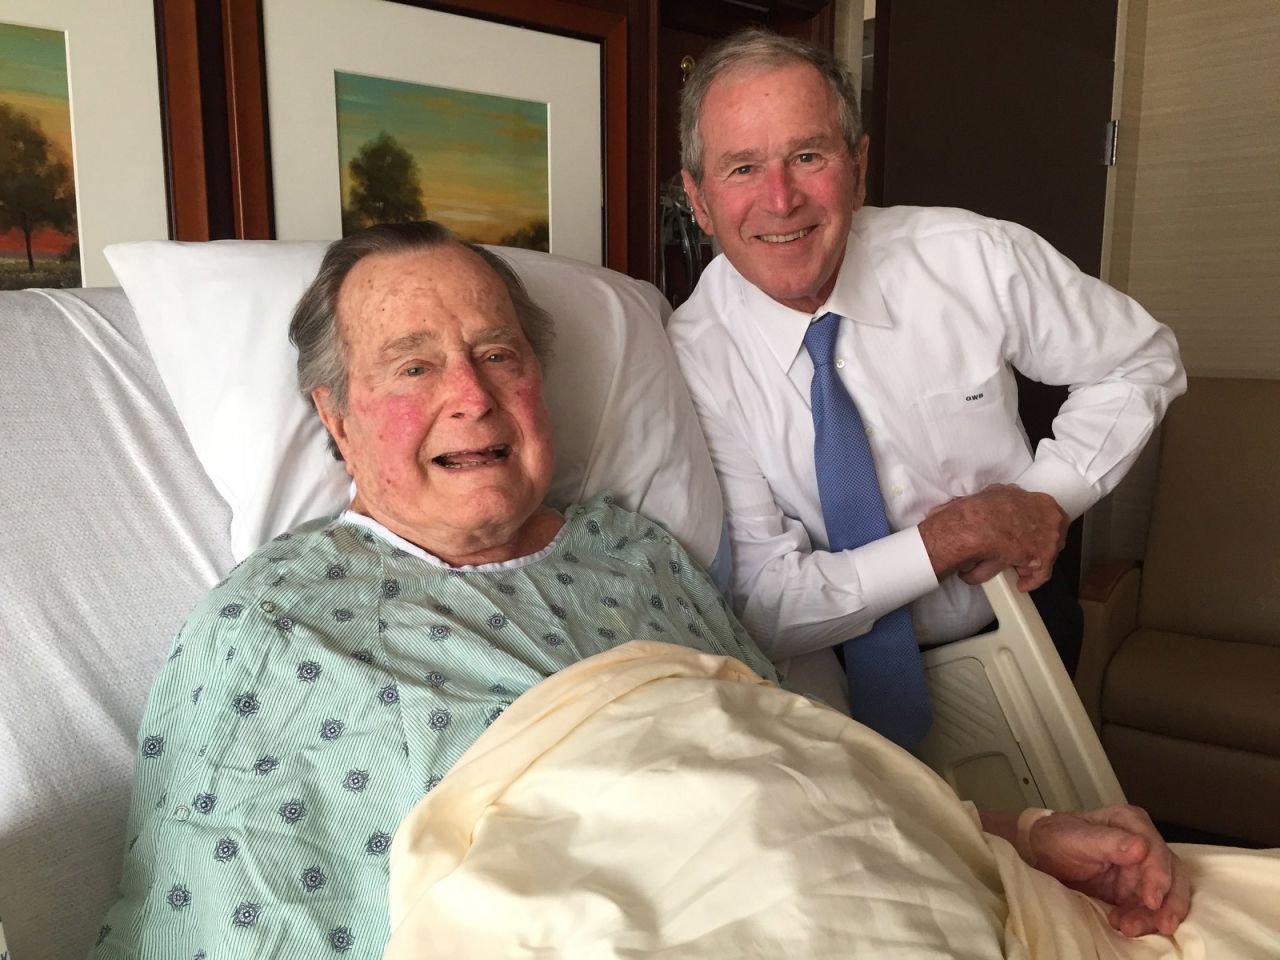 Bush was admitted to a hospital in April 2017 for an acute respiratory problem stemming from pneumonia. This photo of him and his son George was posted to Twitter. "Big morale boost from a high level delegation. No father has ever been more blessed, or prouder," the elder Bush wrote about the photo.